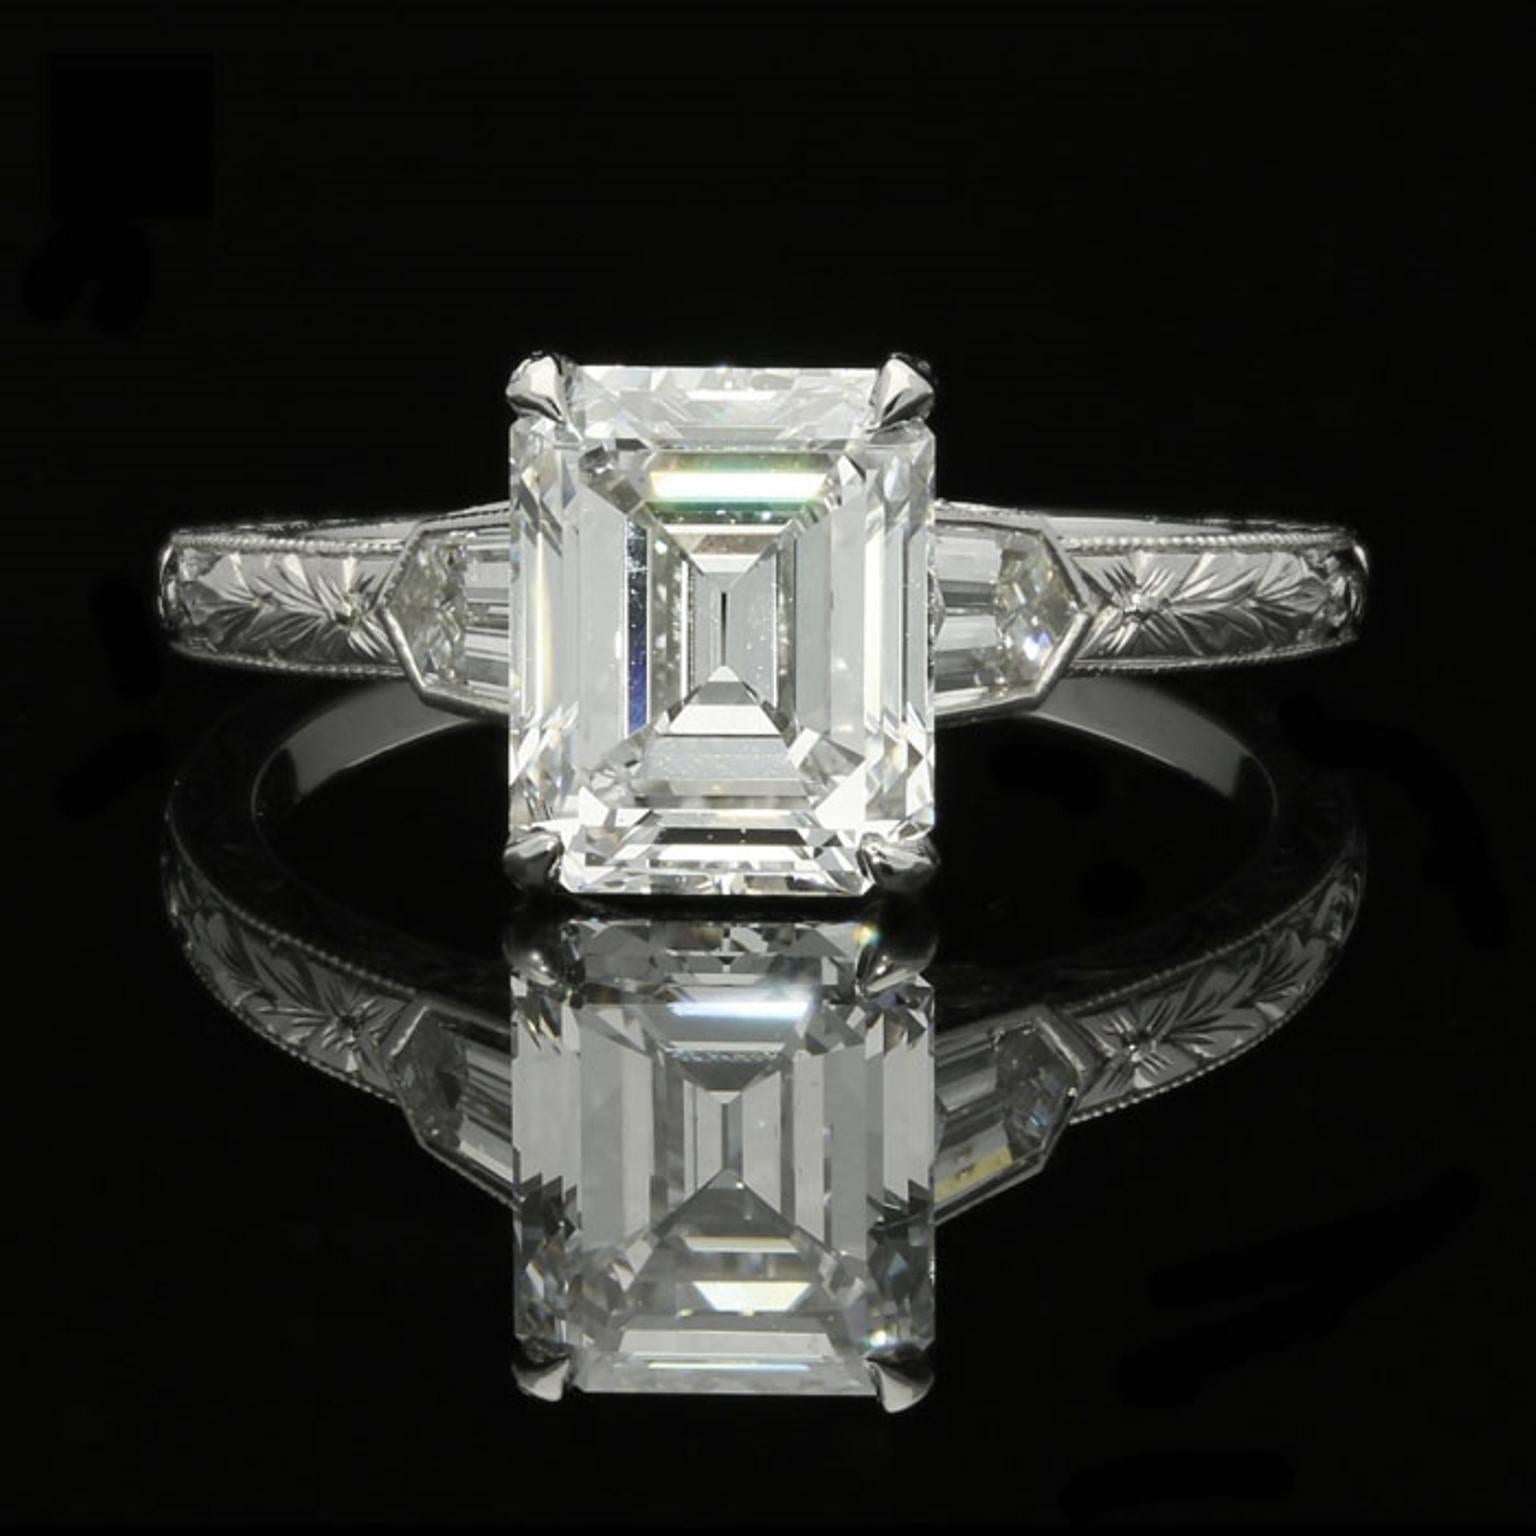 2.02ct D VS2 emerald cut diamond with GIA certificate 
Pair of bullet cut diamonds with a combined weight of 0.20cts.
Pair of bullet cut diamonds with a combined weight of 0.20cts.
UK finger size L, US size 6, can be adjusted to your own finger